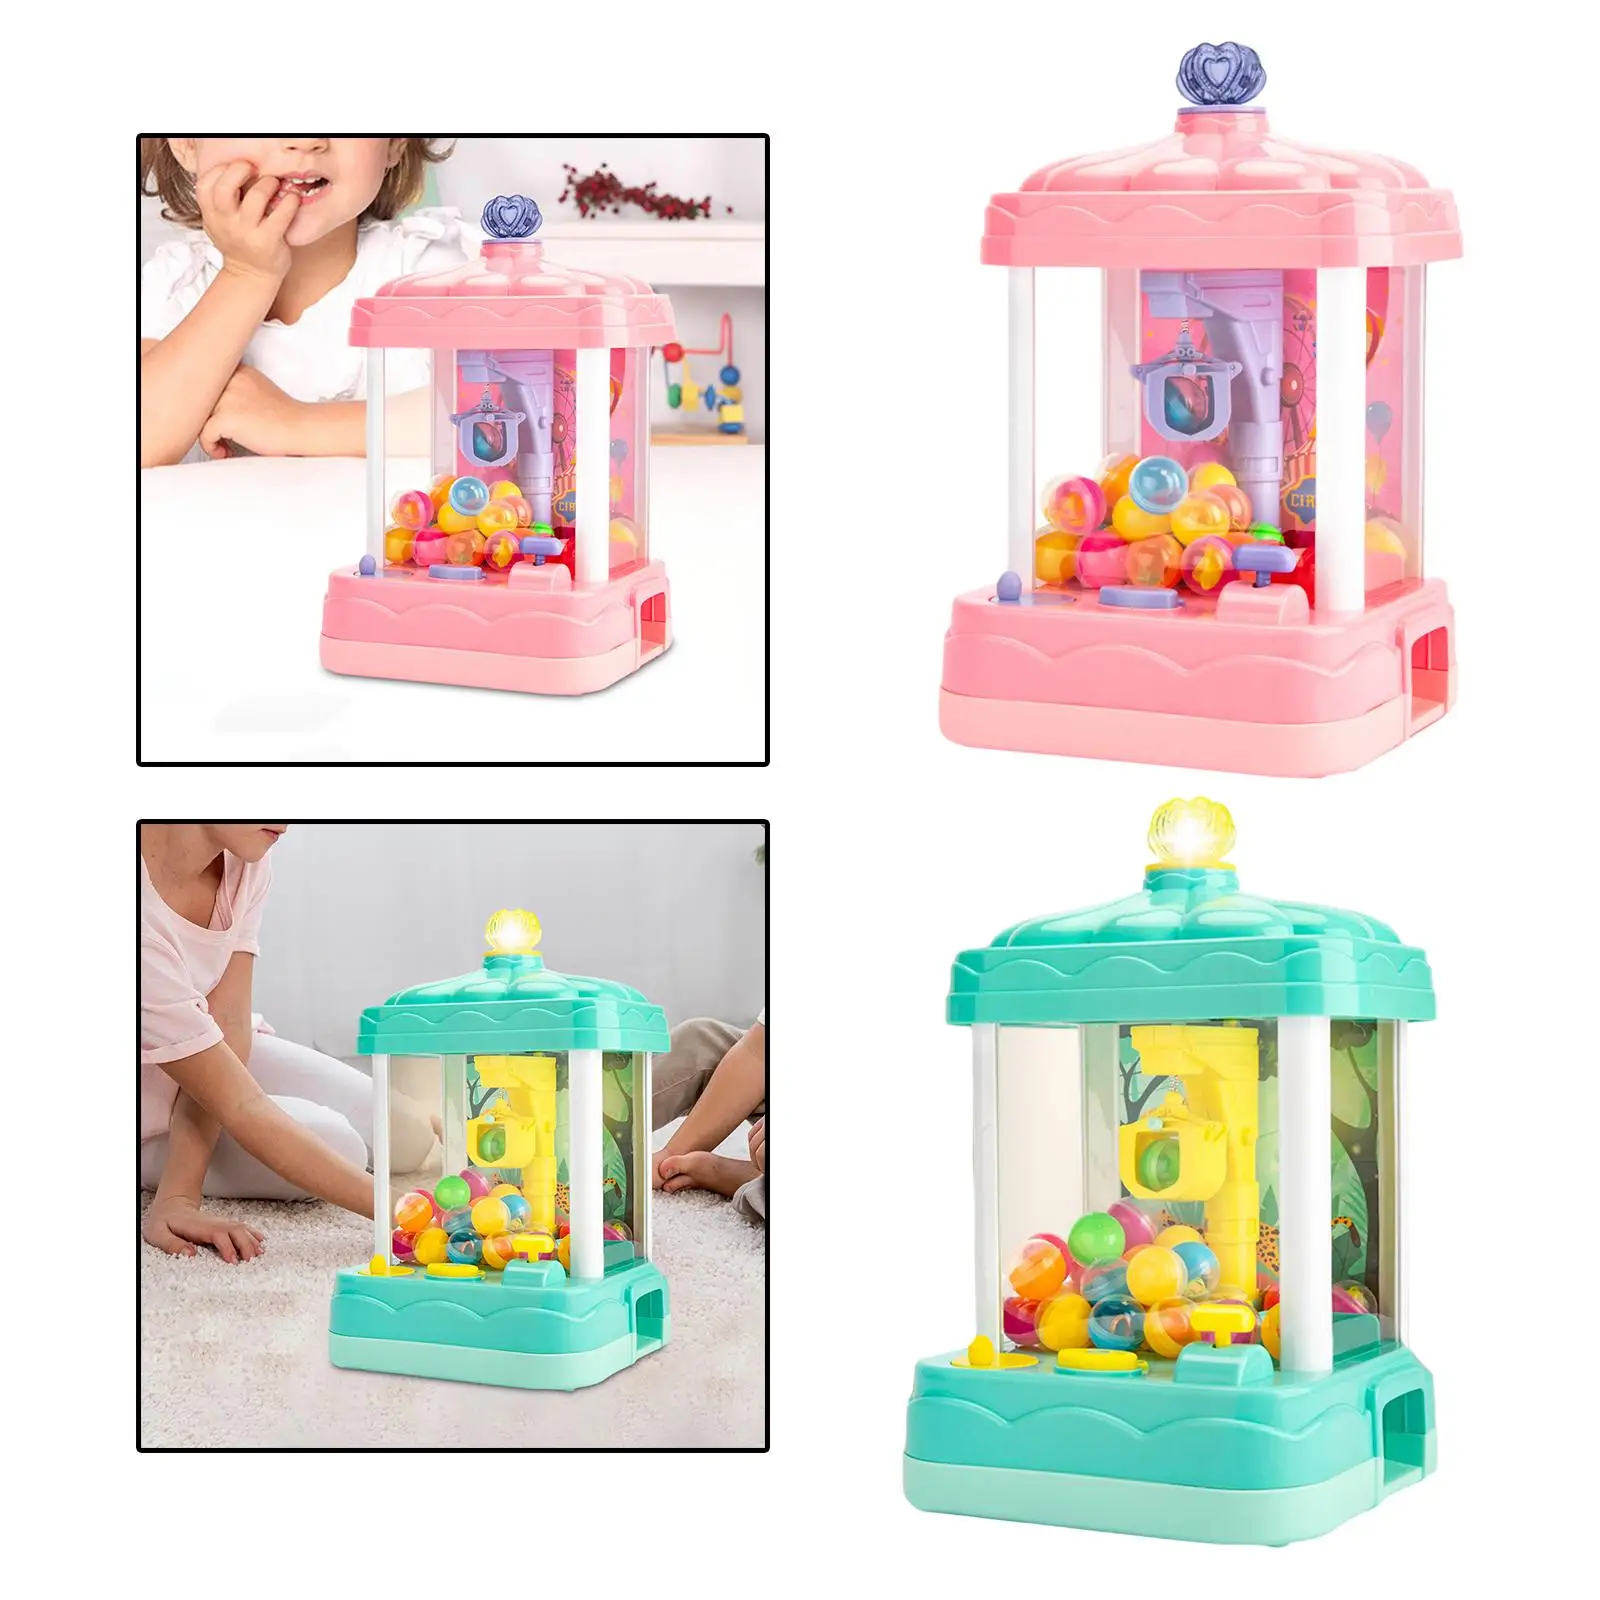 Claw Machine Lights Sound Intelligent System Grabber Machine Crane Machines Coin Operated Play Game for Xmas Birthday Gifts Kids